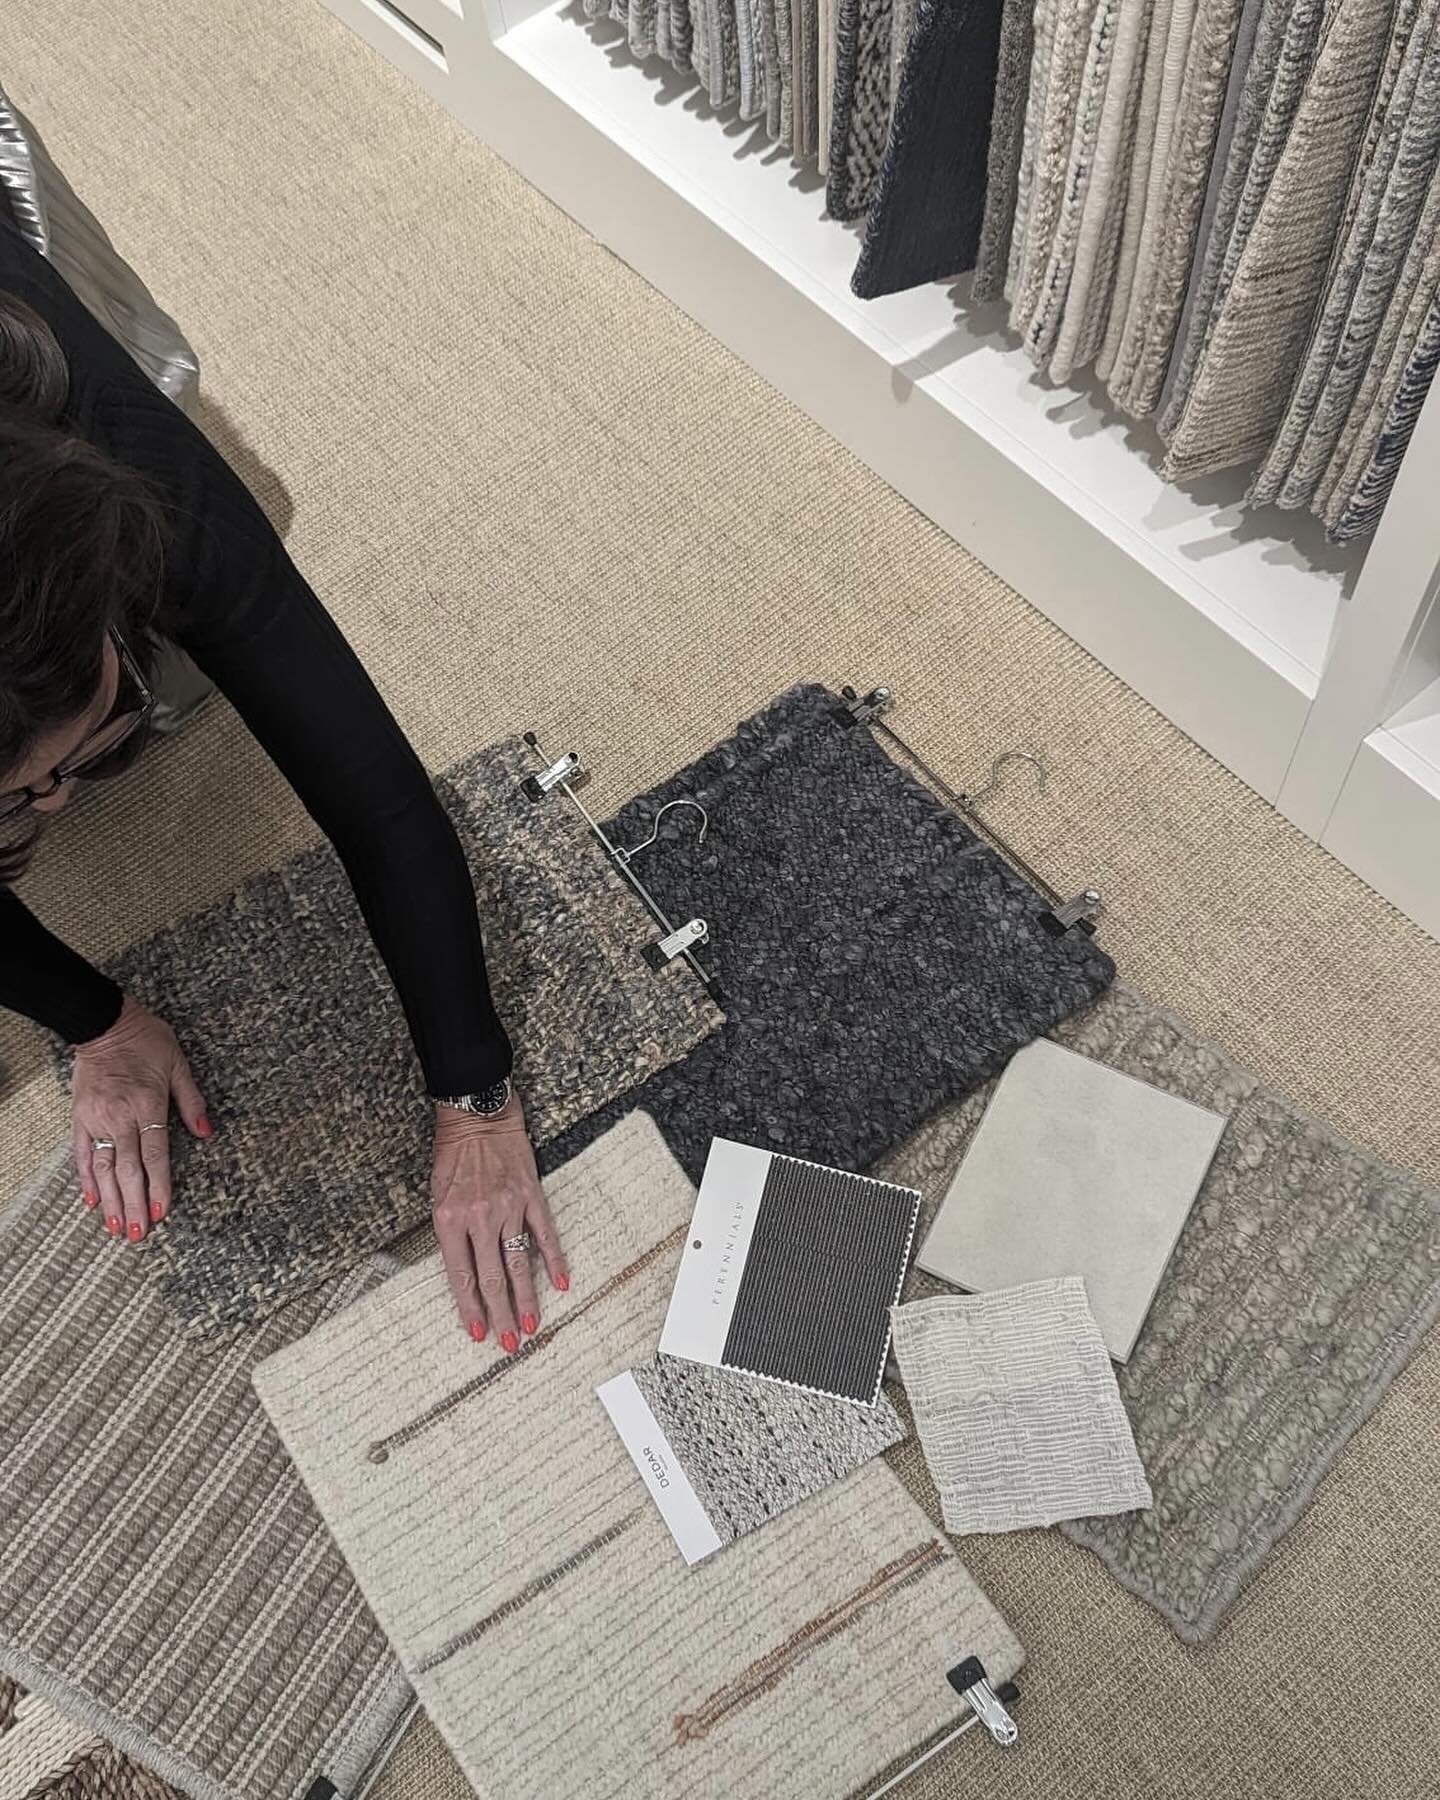 We spend a lot of time searching for exactly the right piece for each room we design.
The rug for the Principal Suite at our Coastal project had to be the right mix of texture and subtle pattern.
We spent a lovely morning (mostly on the floor) @peter